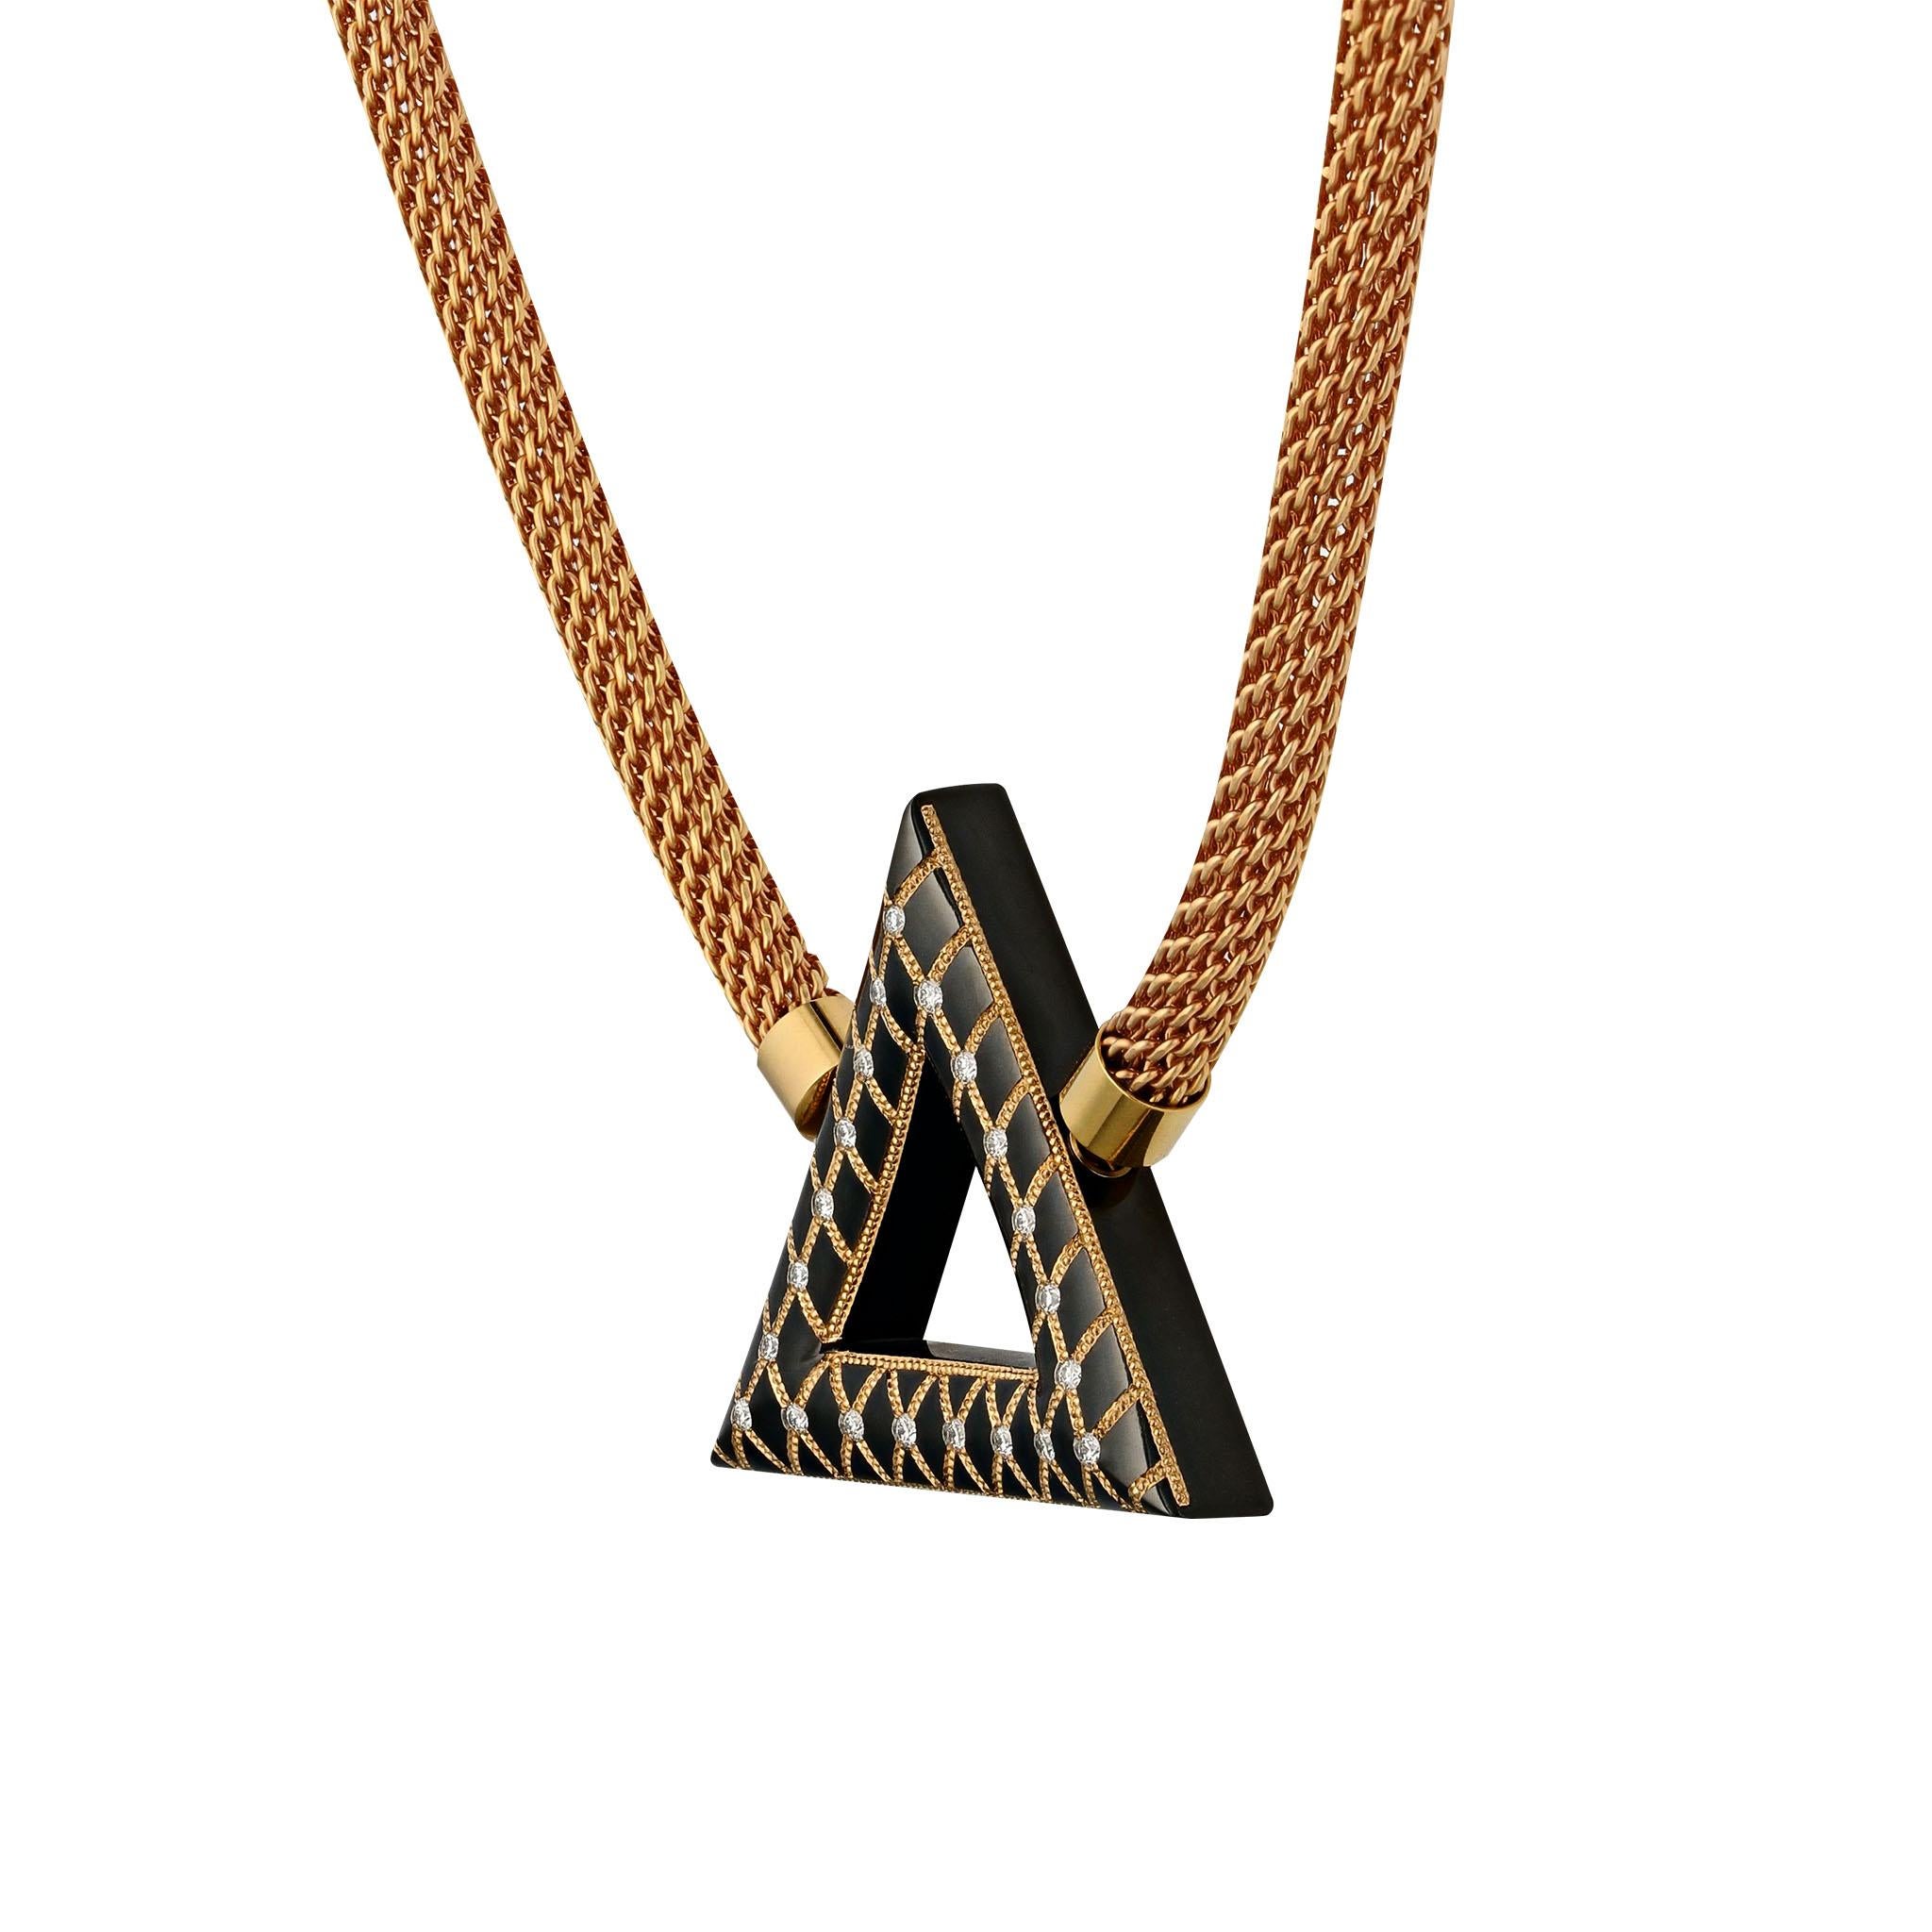 Eye catching triangular pendant in Knightsteel. This 37 mm triangular pendant has an undulating surface which is inlaid with 22K Rose Gold. This inlay has been shaped in the technique created and patented by Zoltan David (US Patent #6594901). There